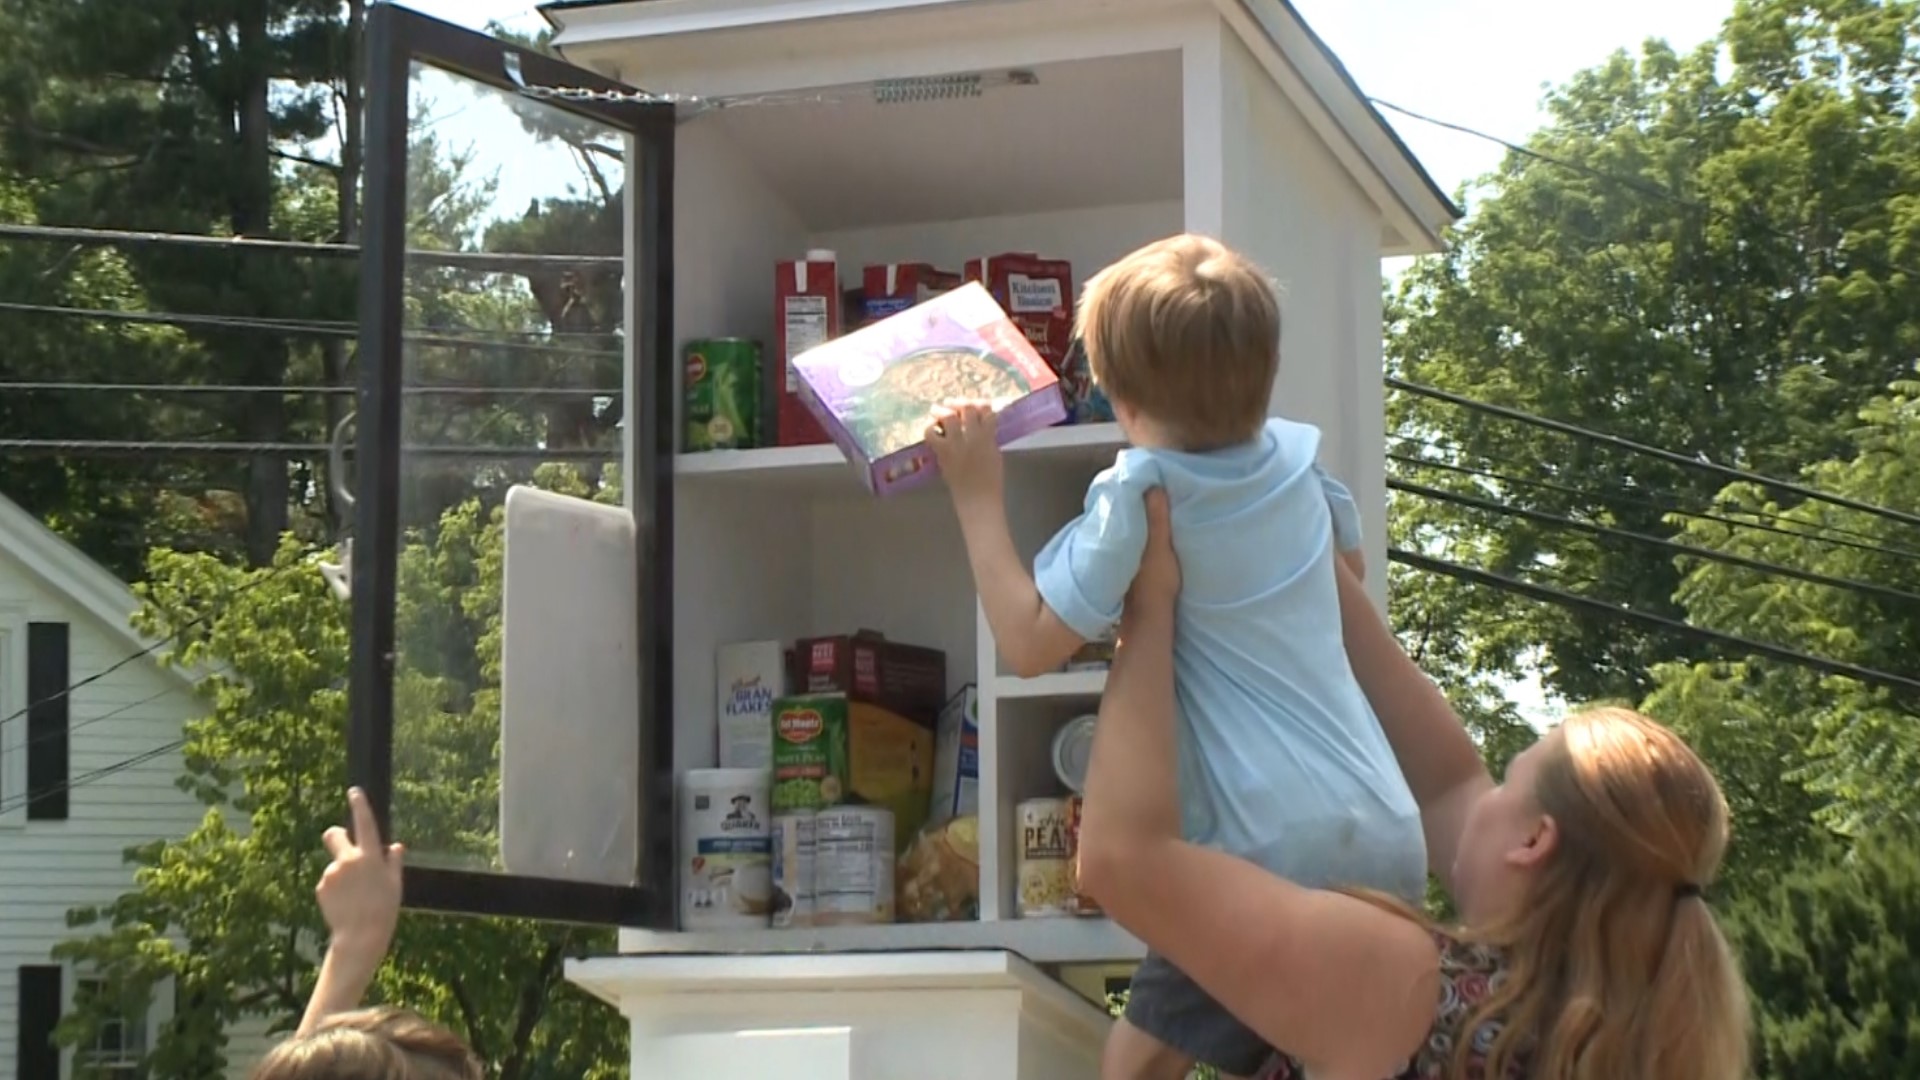 Volunteers collect and stock non-perishable food items in community pantries so no one goes hungry.